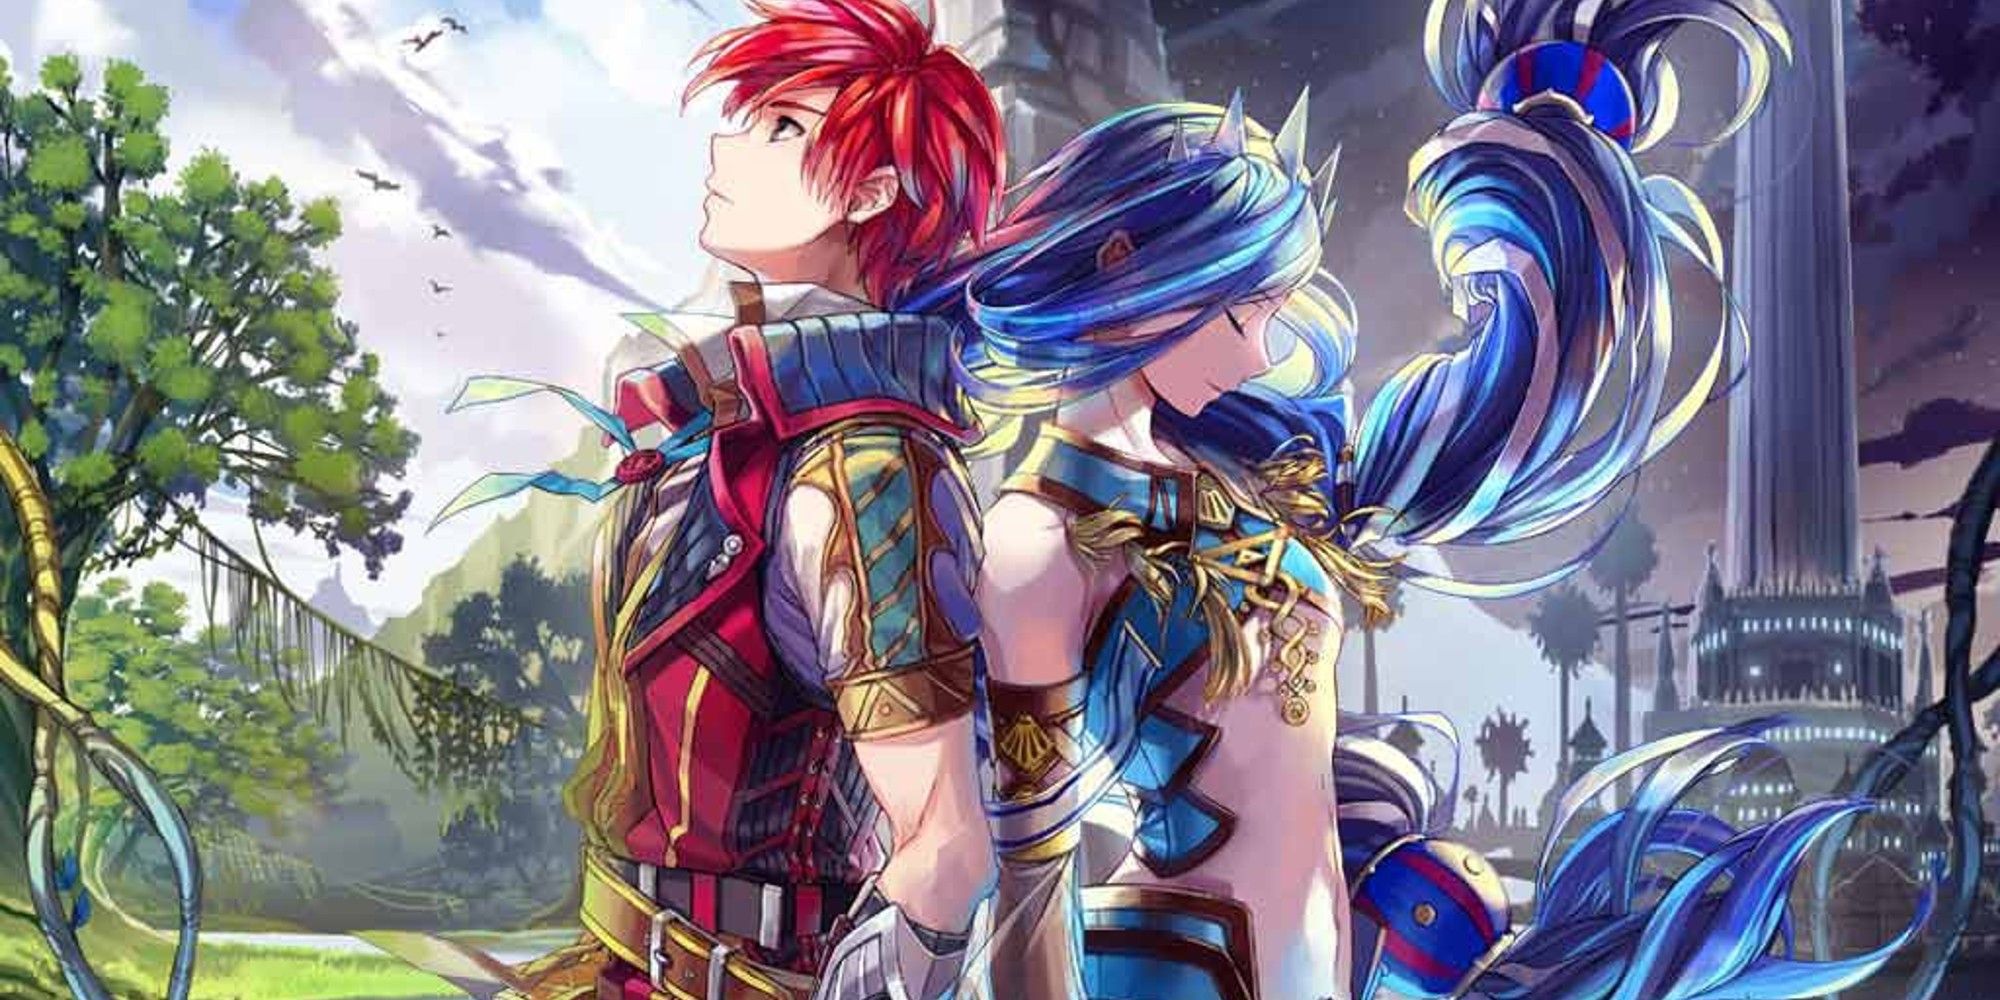 Adol and Dana back to back in font of a forest and a tower.